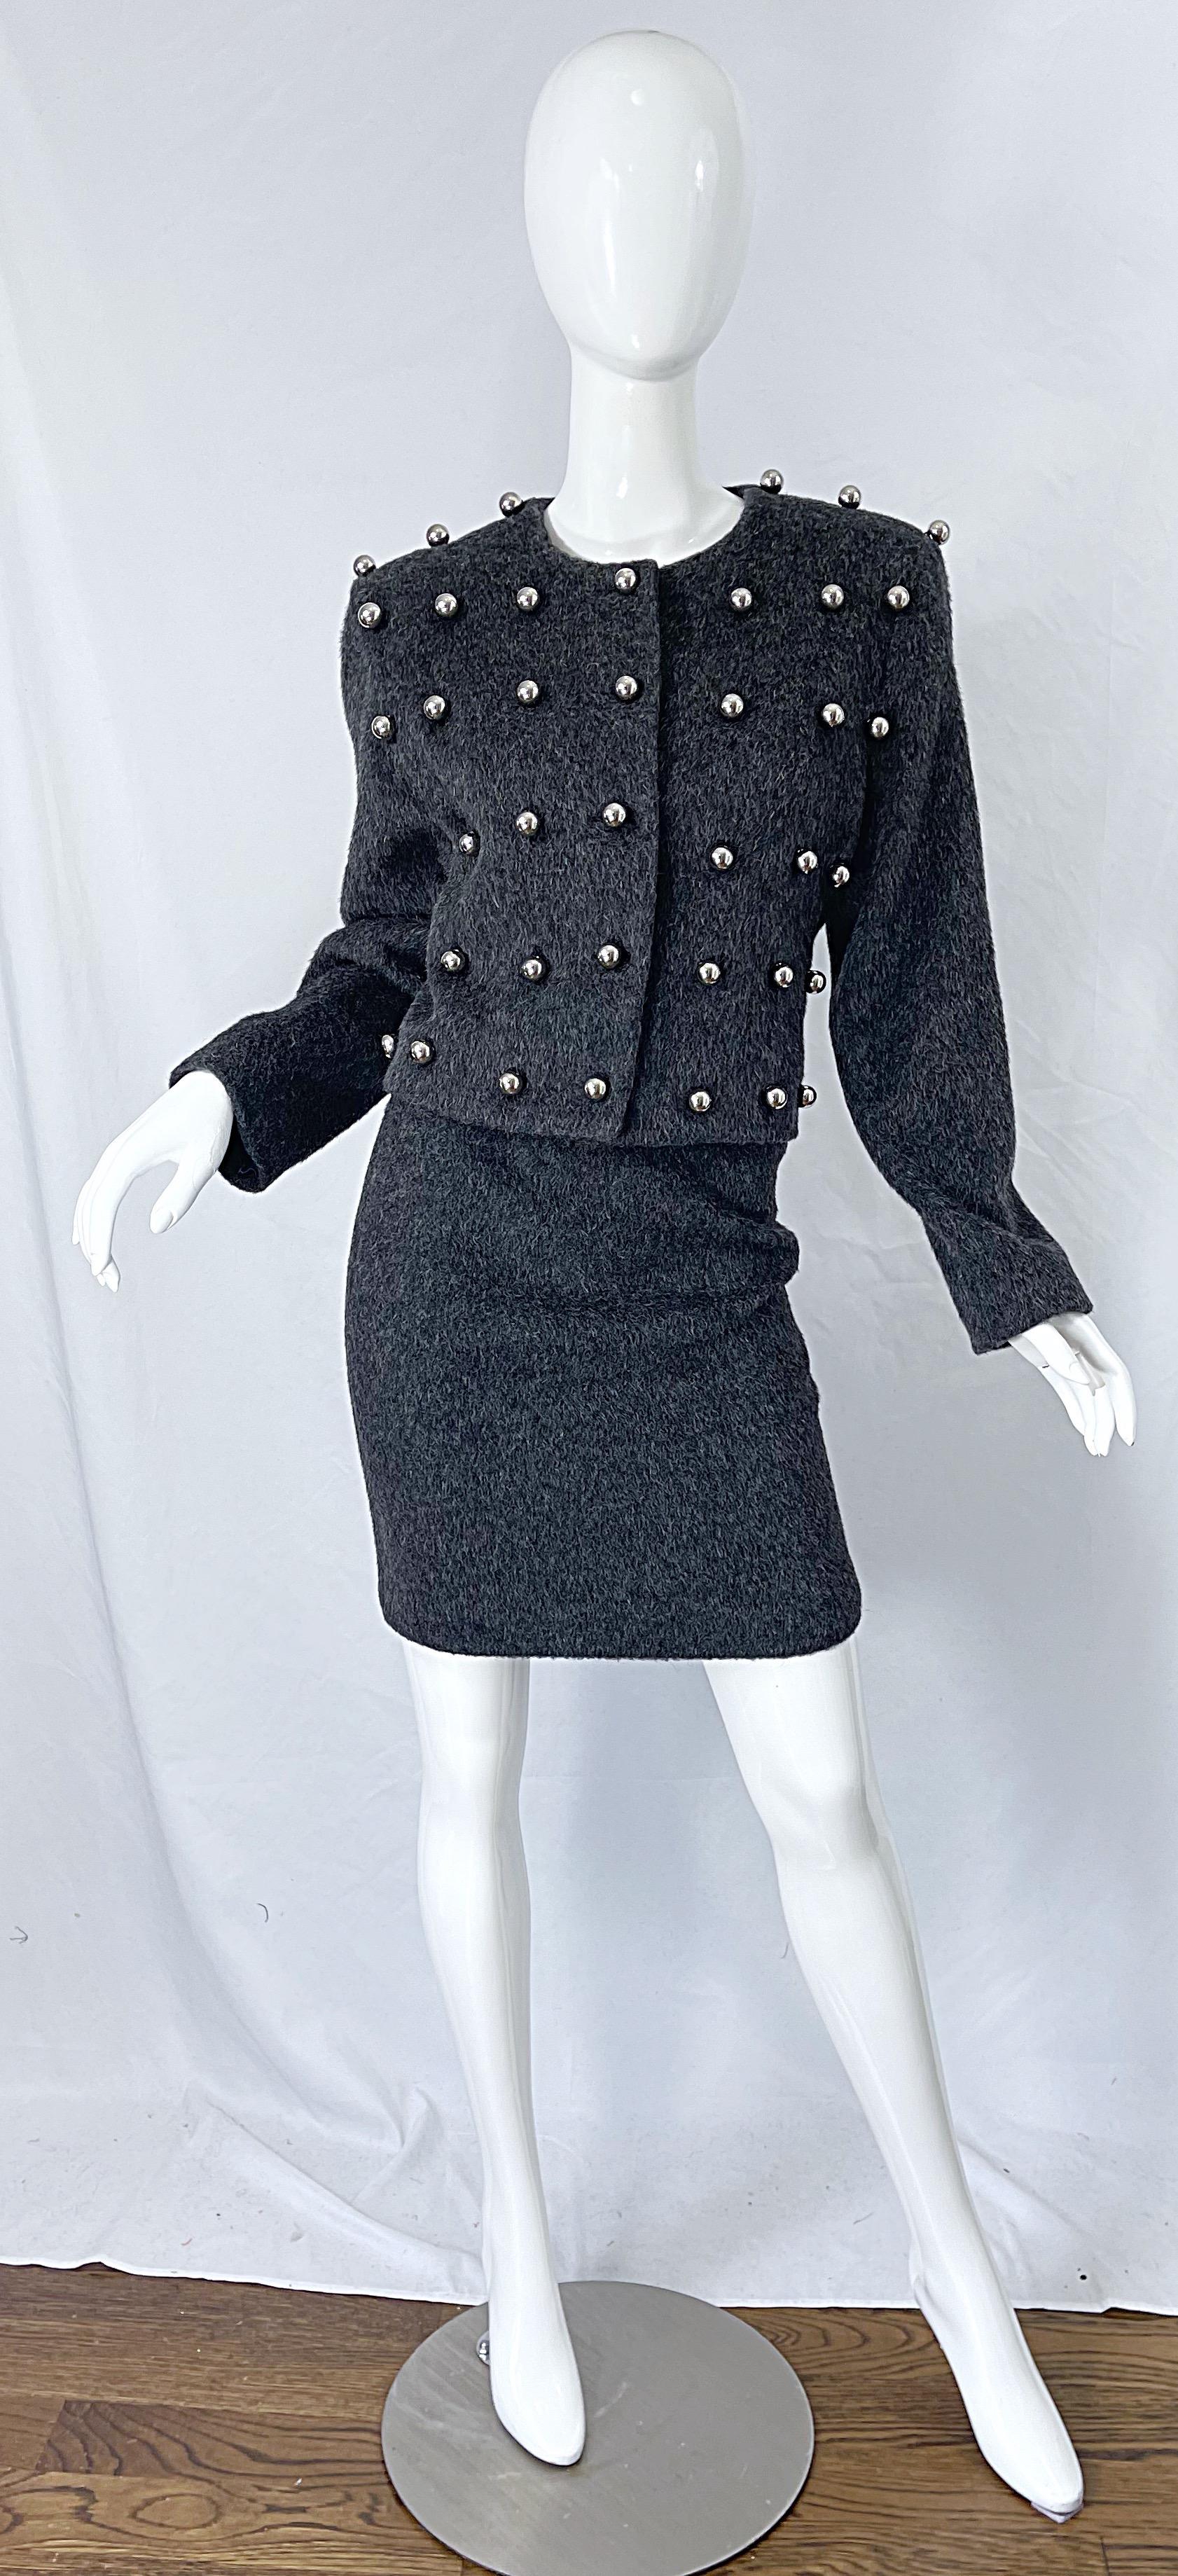 Rare Avant Garde PATRICK KELLY late 80s charcoal gray silver studded ball skirt suit ! Tailored jacket features hand-sewn silver balls throughout the front. There is also a spare ball sewn into the inside. High waisted mini skirt has hidden zipper